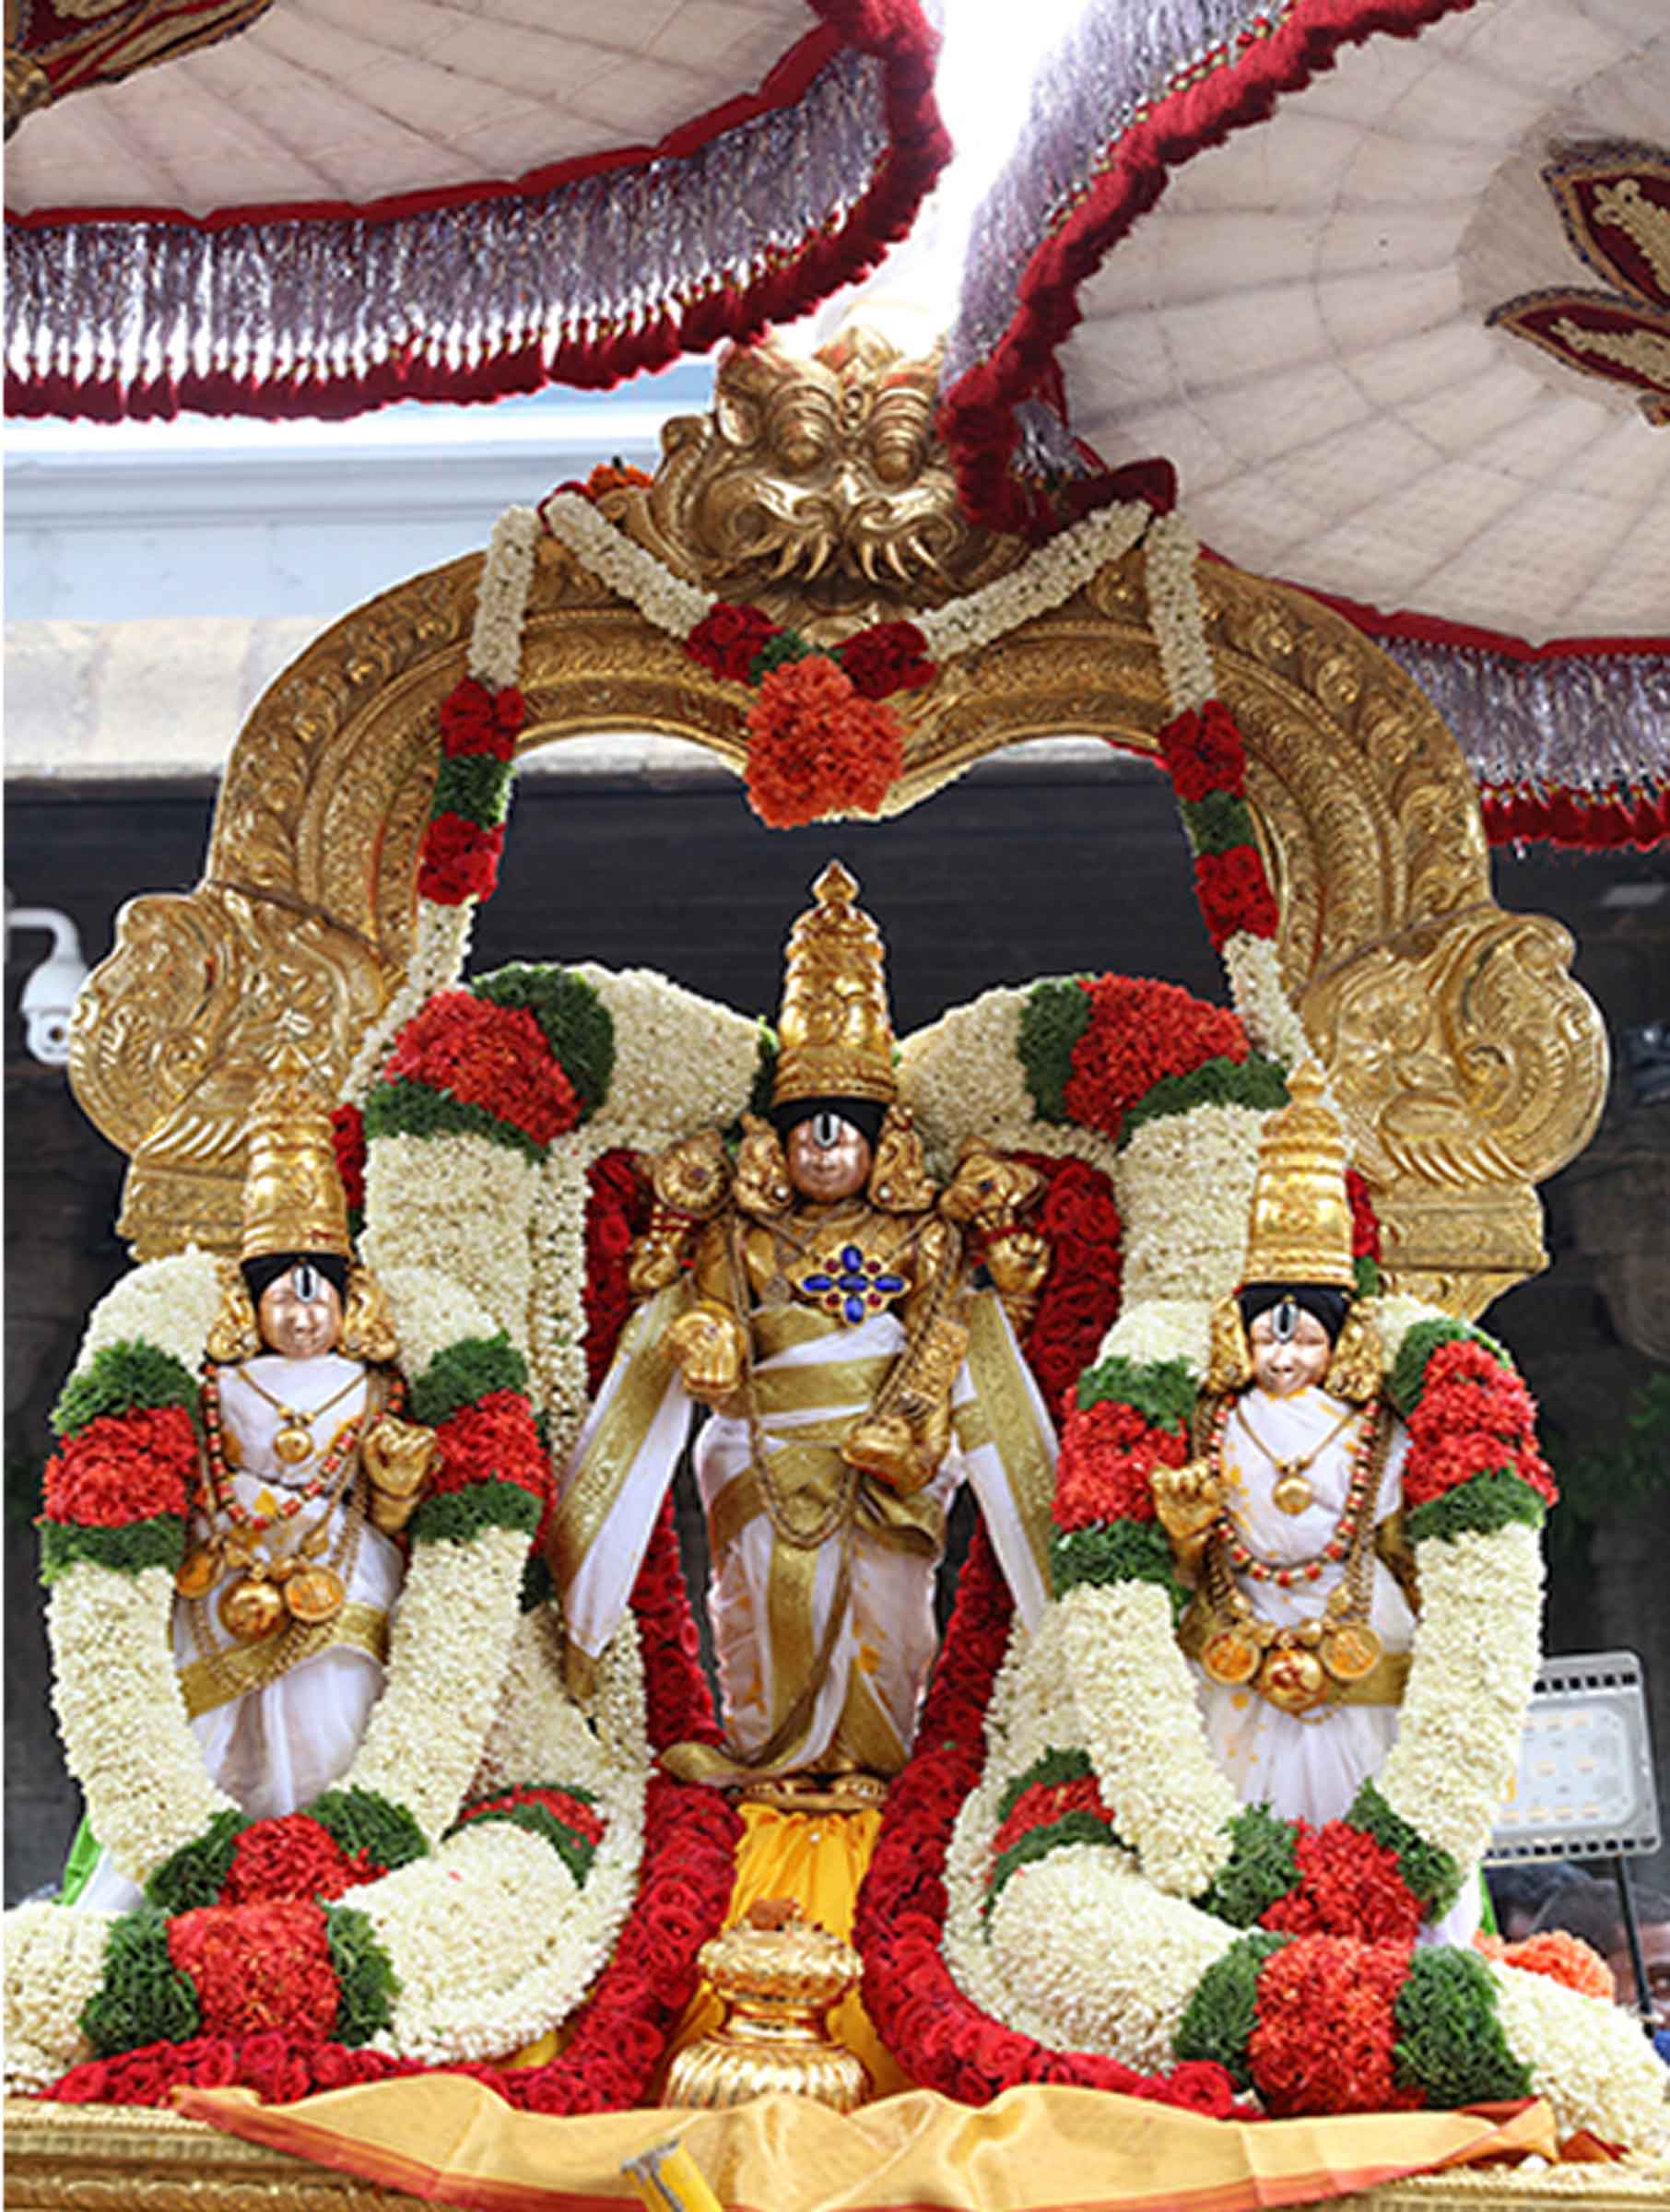 MALAYAPPA REAPPEARS IN GOLDEN ARMOUR